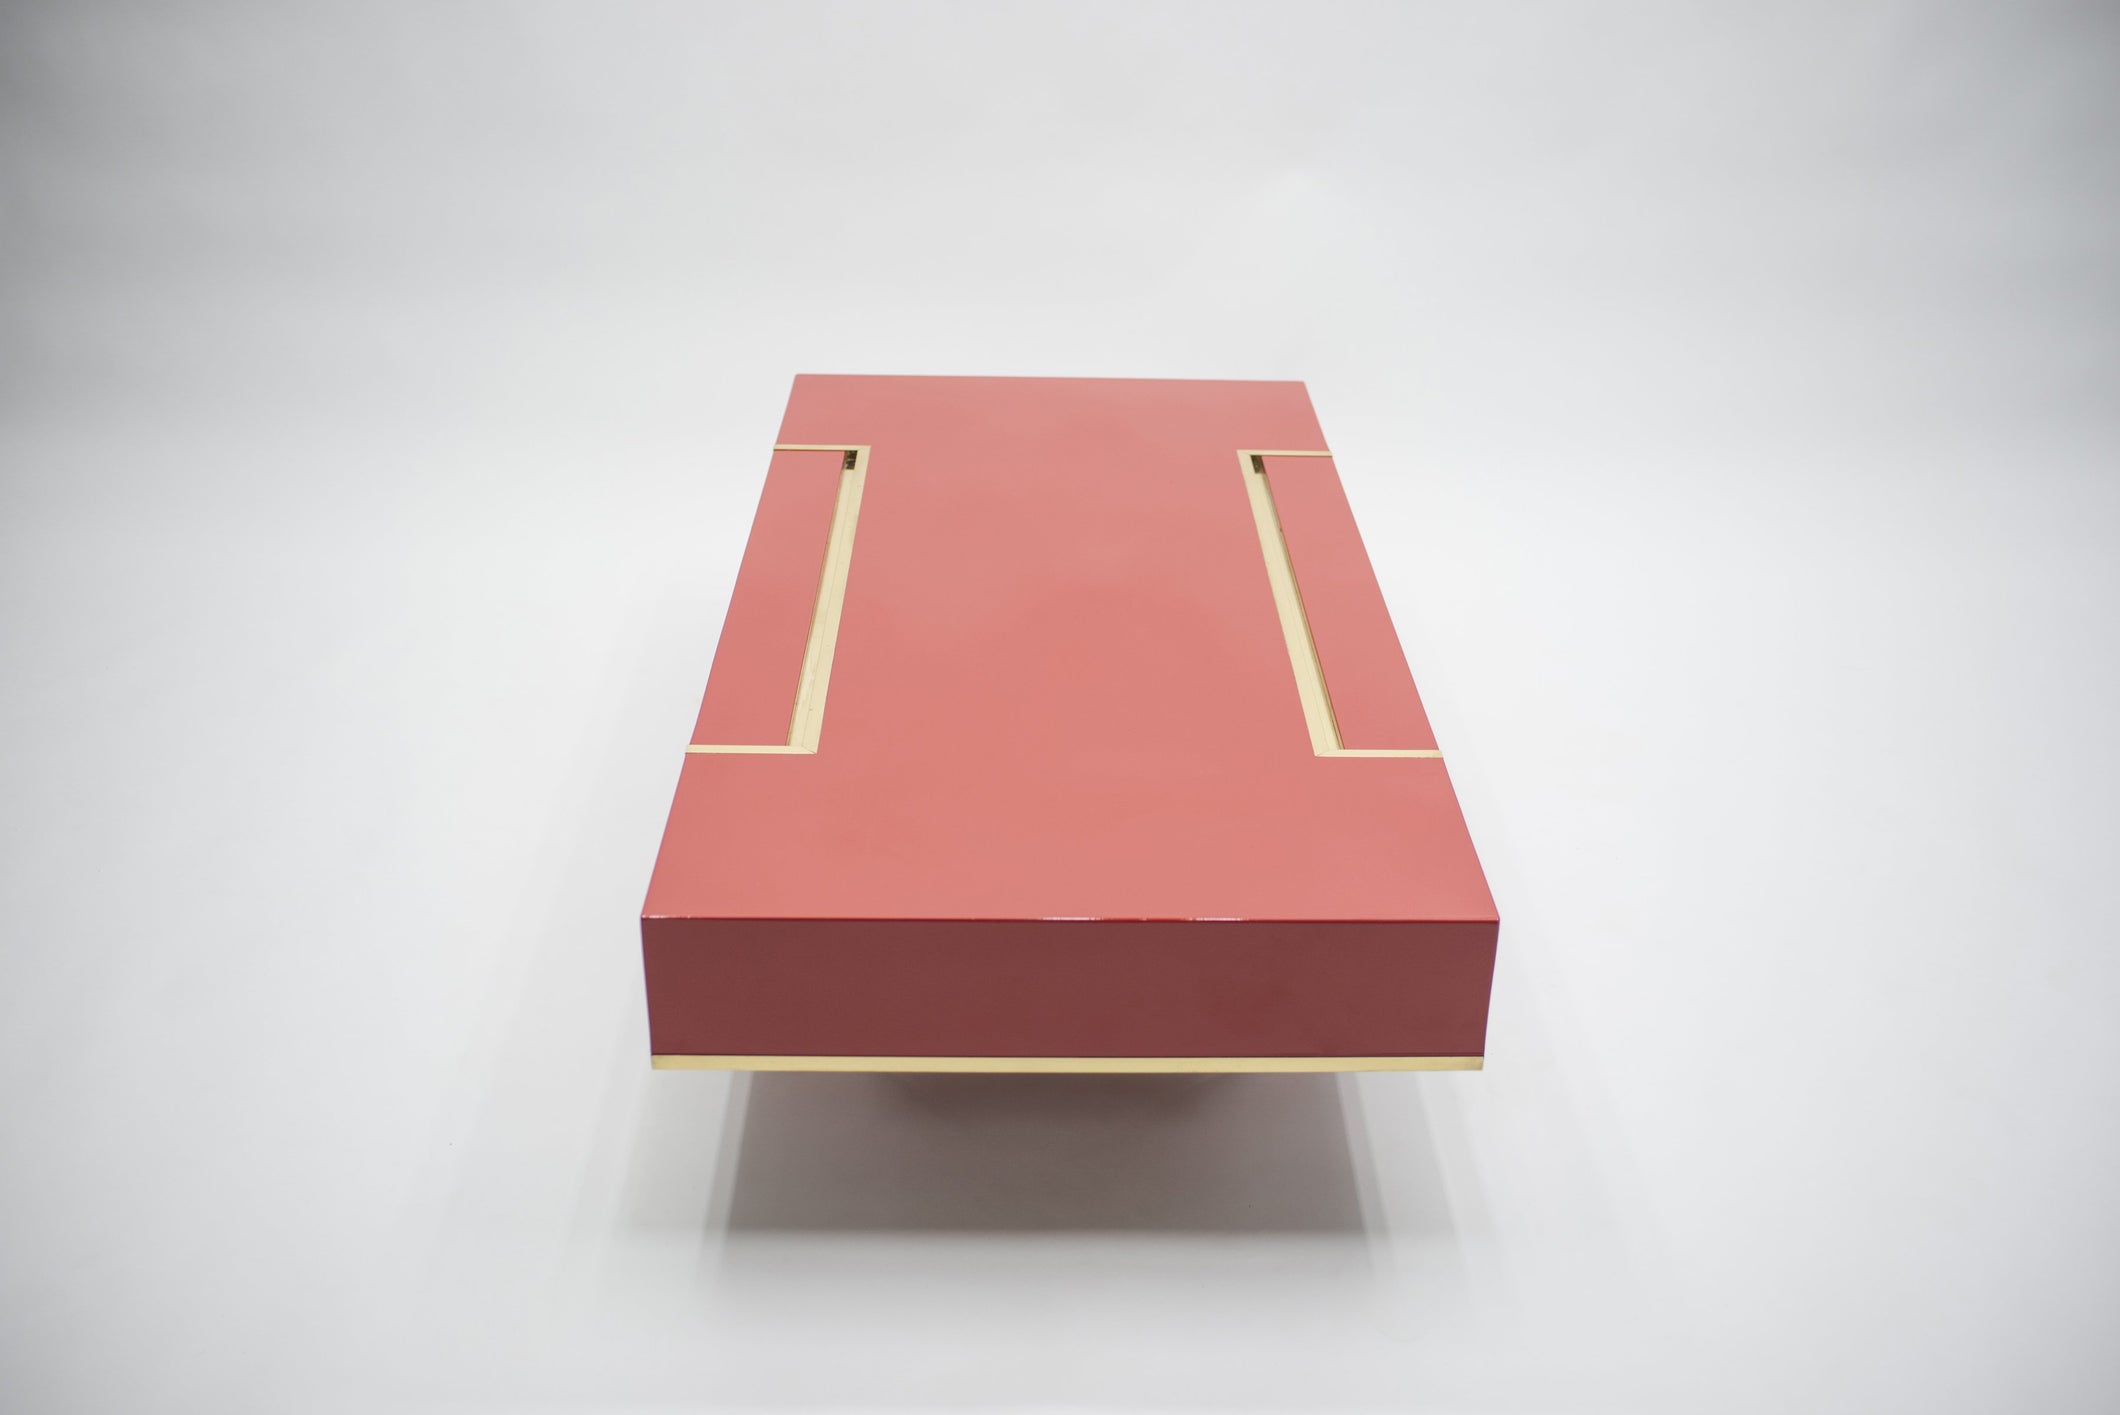 Rare J.C. Mahey red lacquer and brass coffee table 1970s